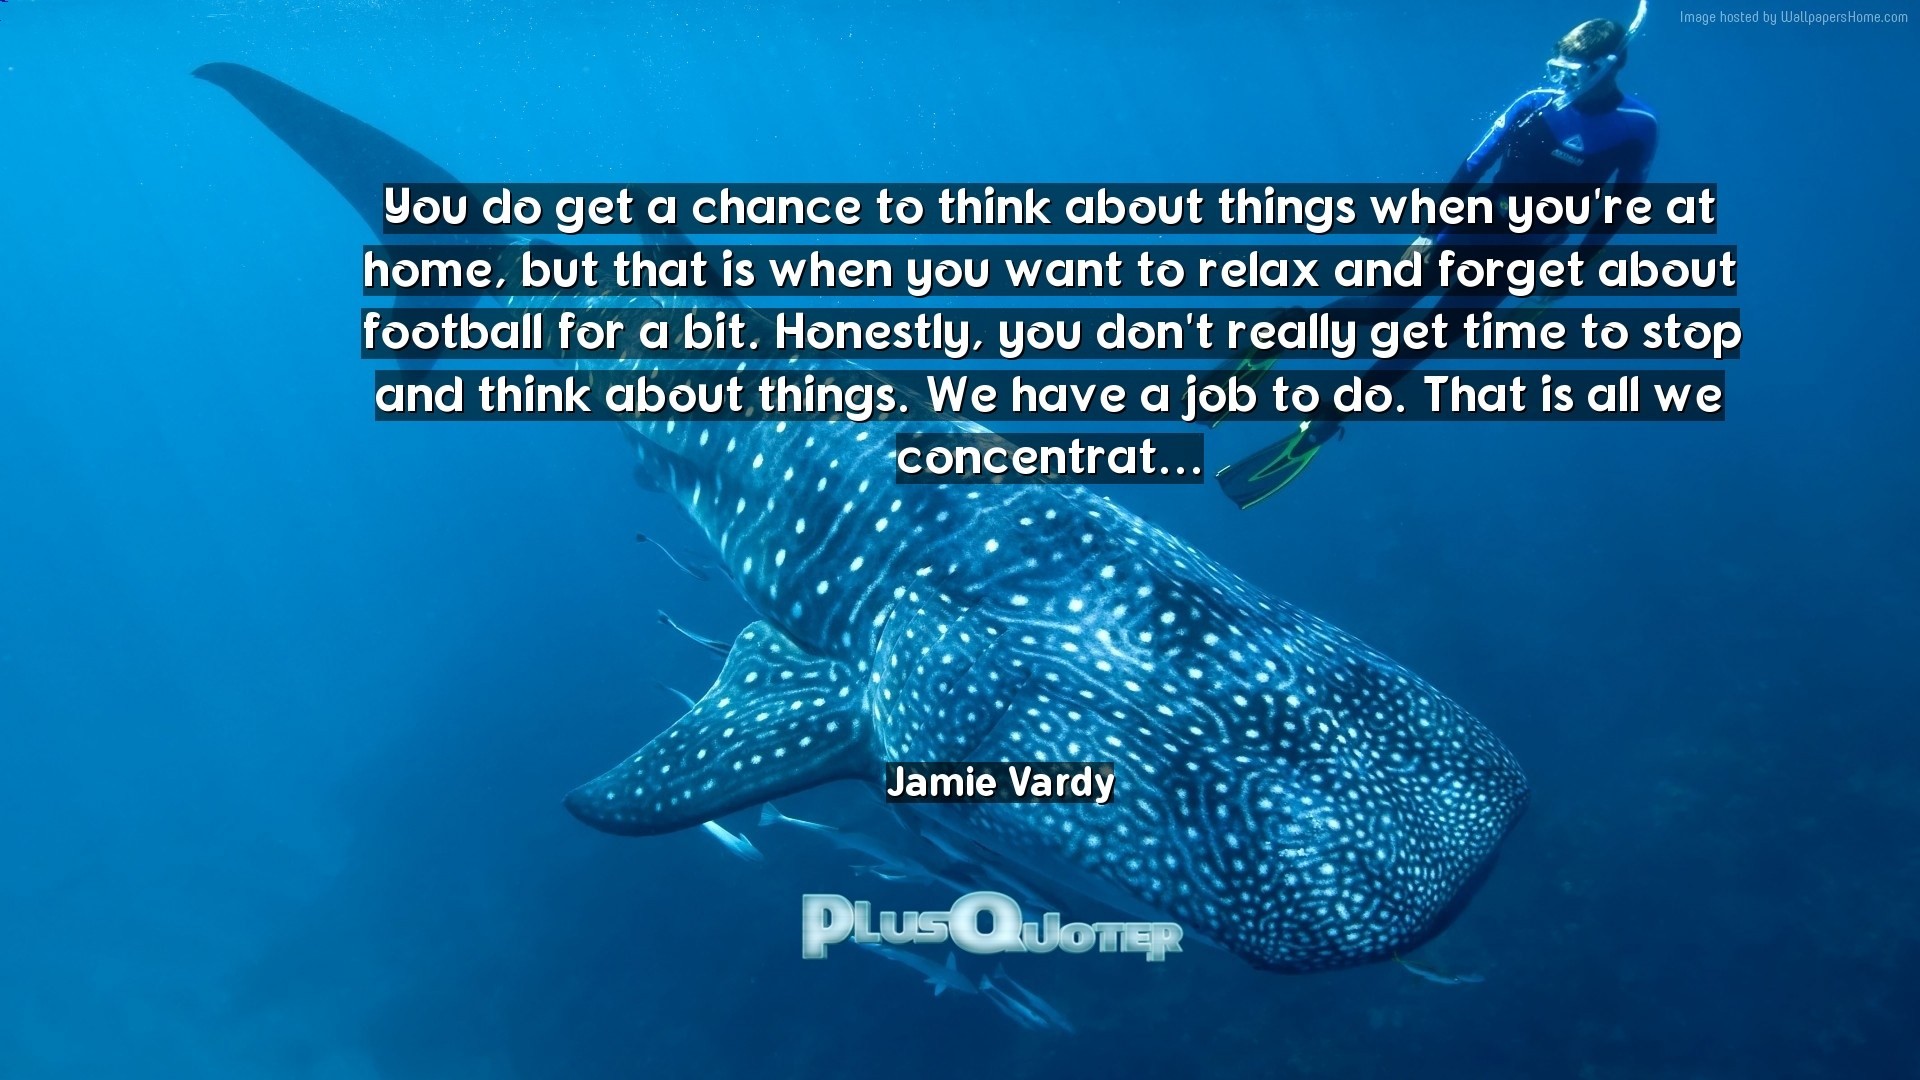 1920x1080 Download Wallpaper with inspirational Quotes- "You do get a chance to think  about things